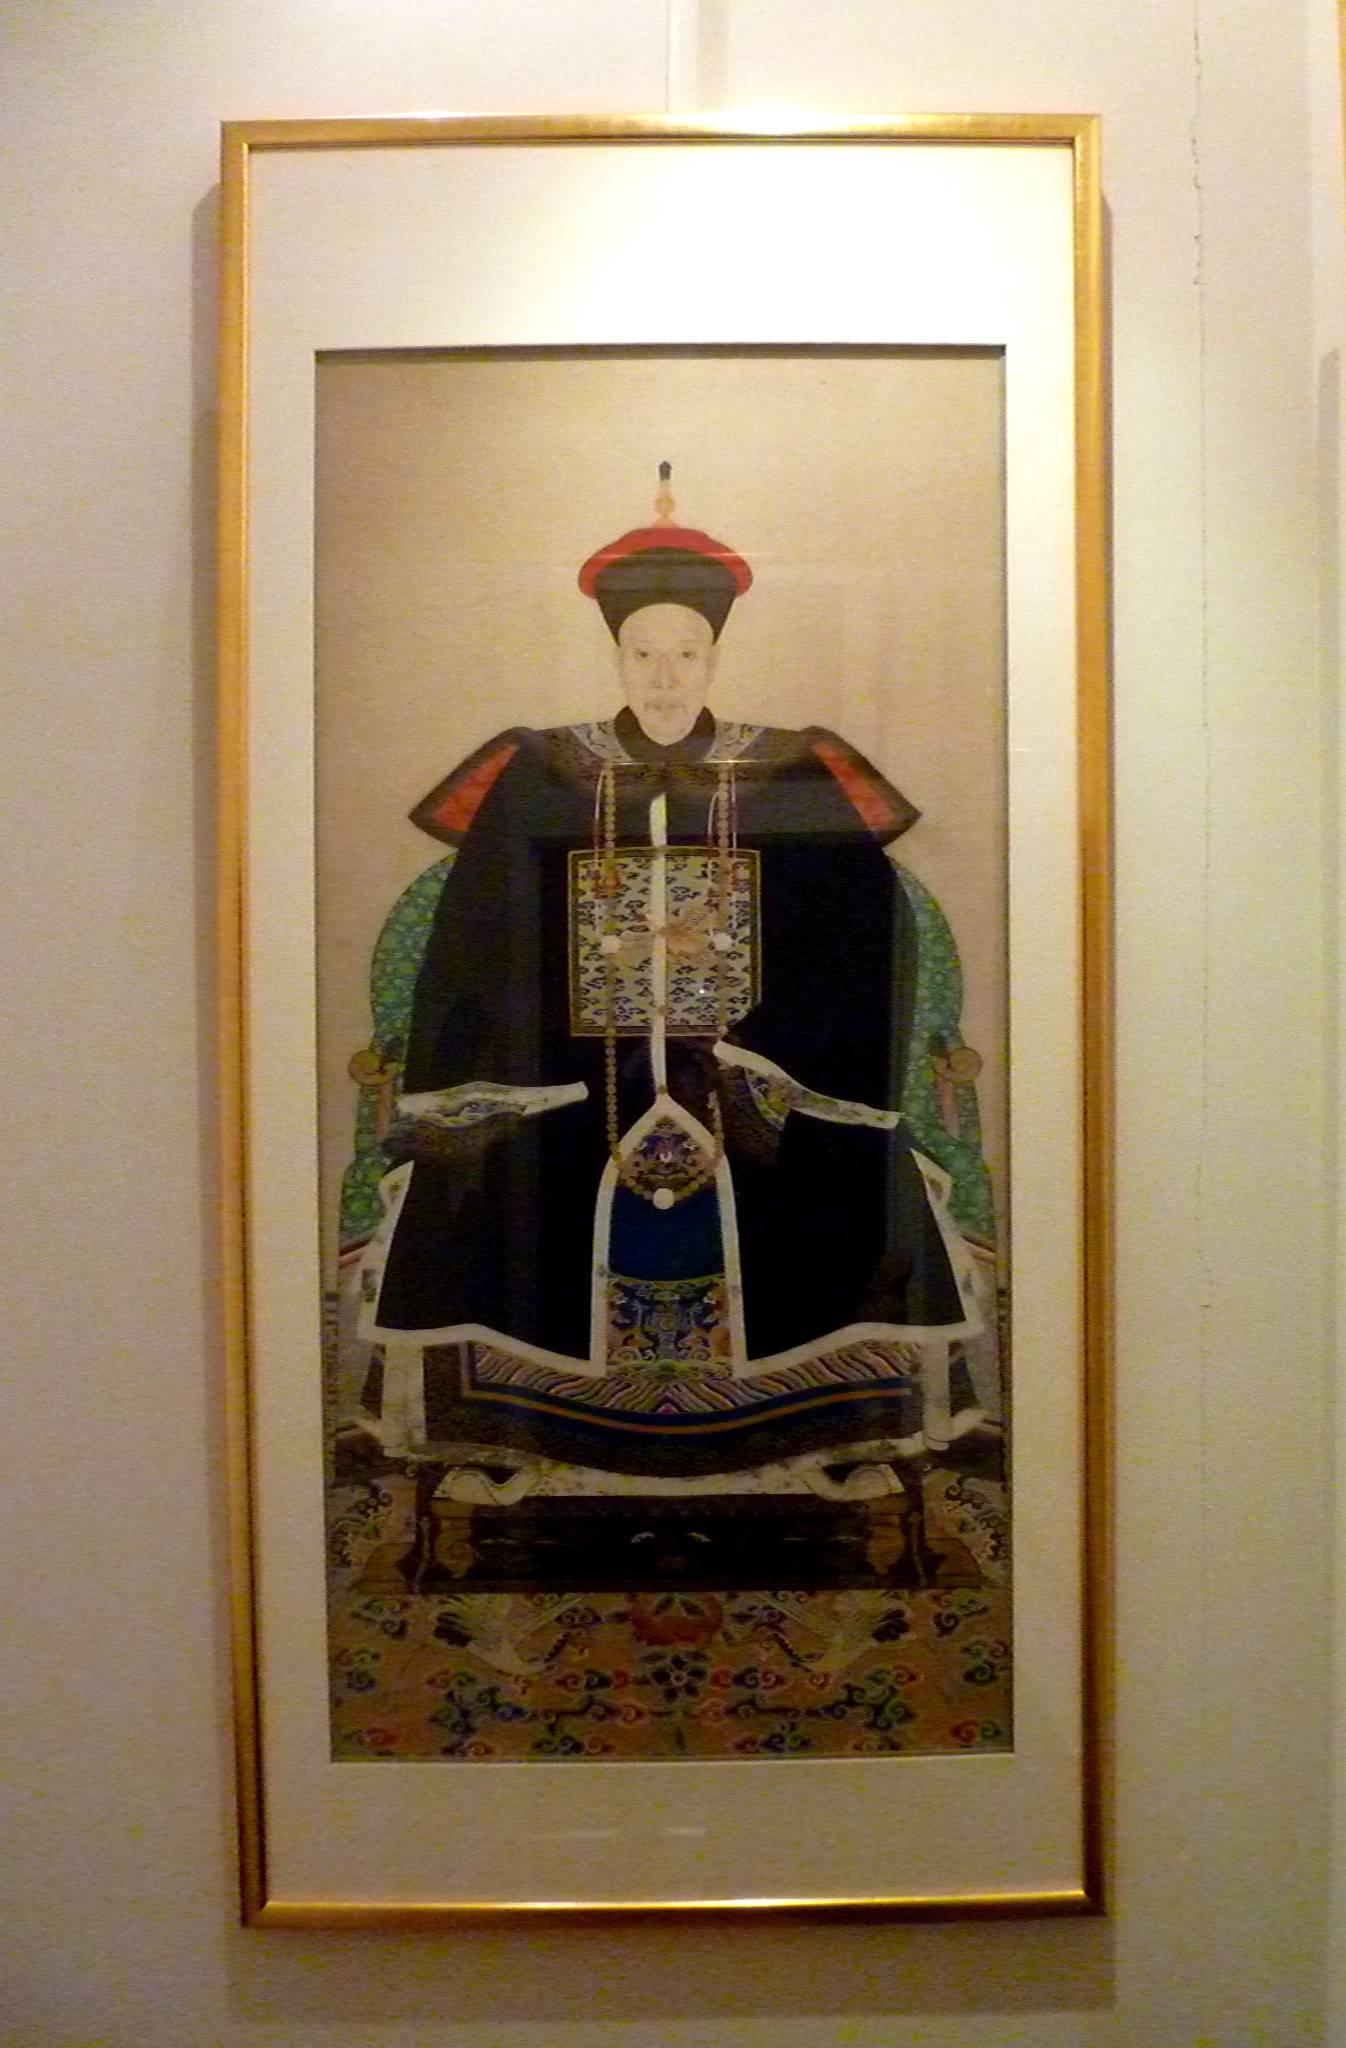 Fine portrait of an imperial 4th rank civil official, elegant colors and refined detail, ink and color on silk, 19th century, conservation framed.